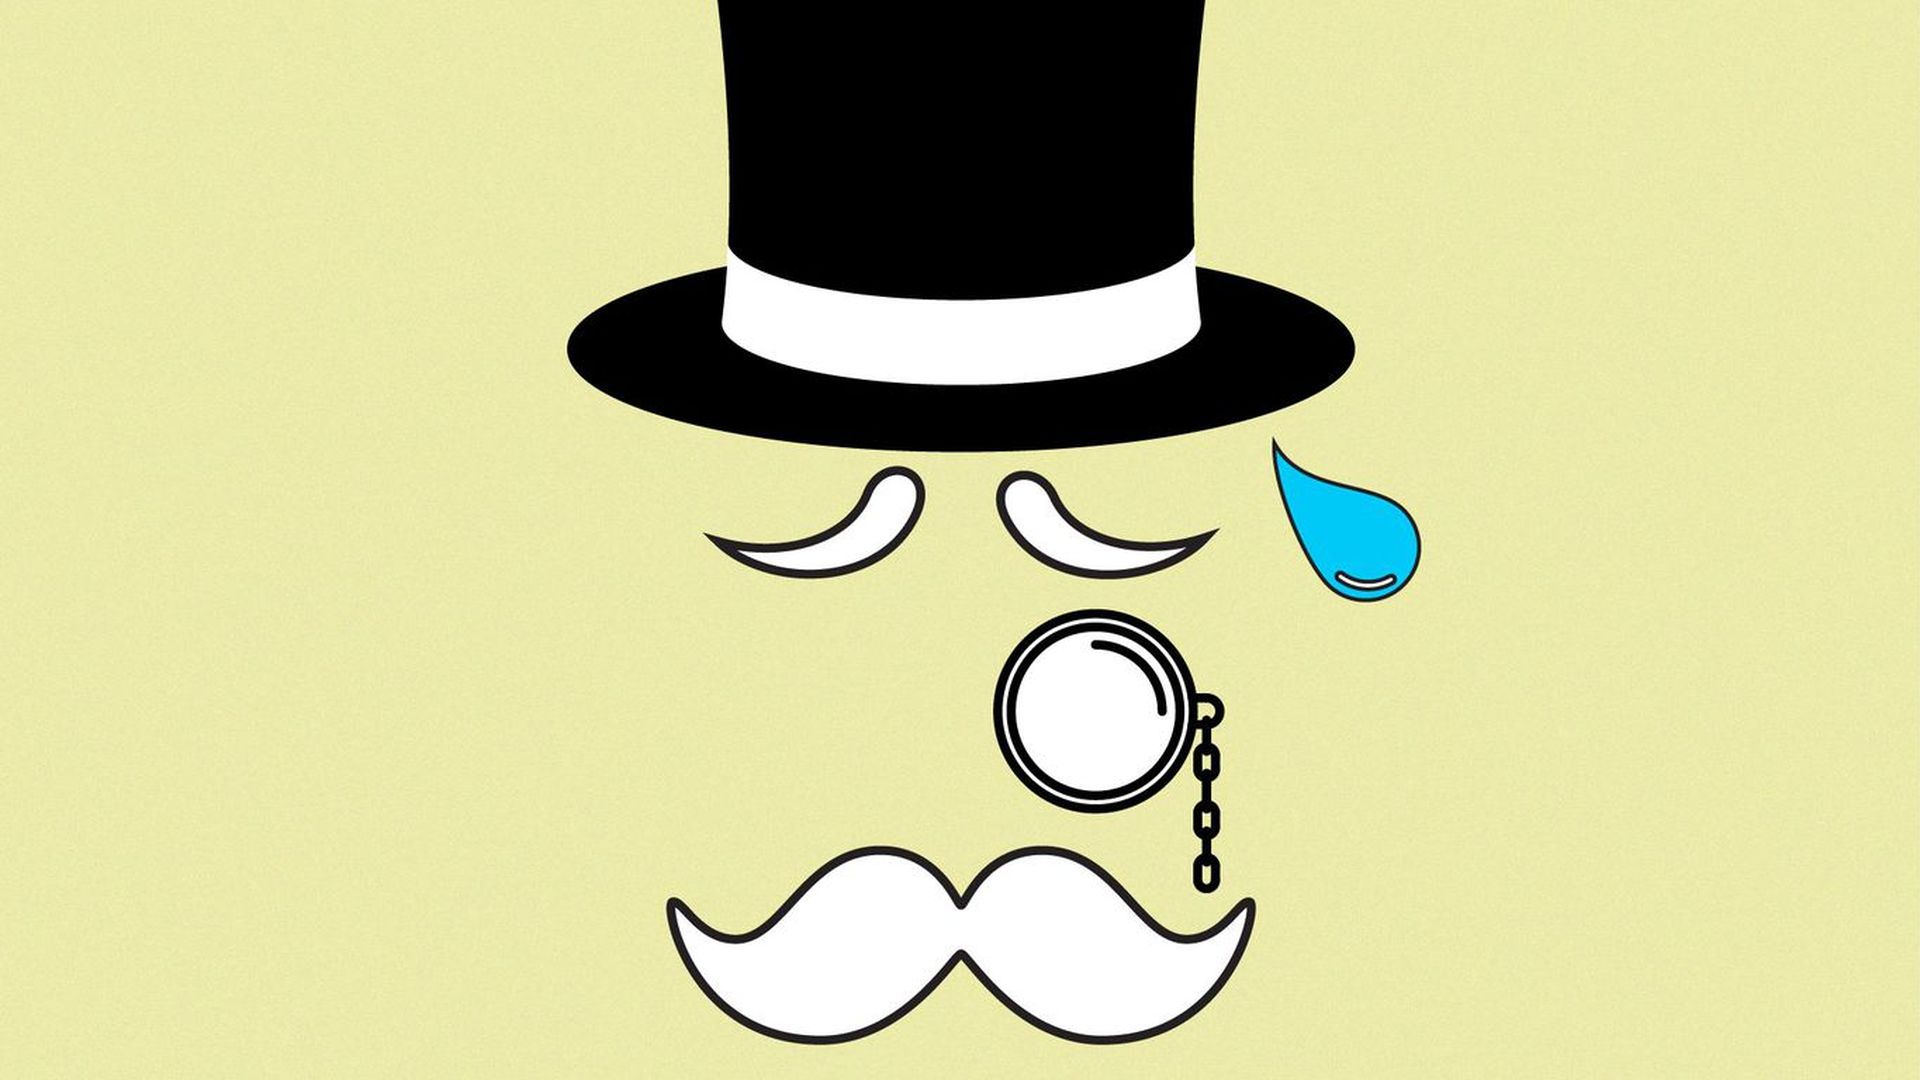 Crying monopoly man with monocle